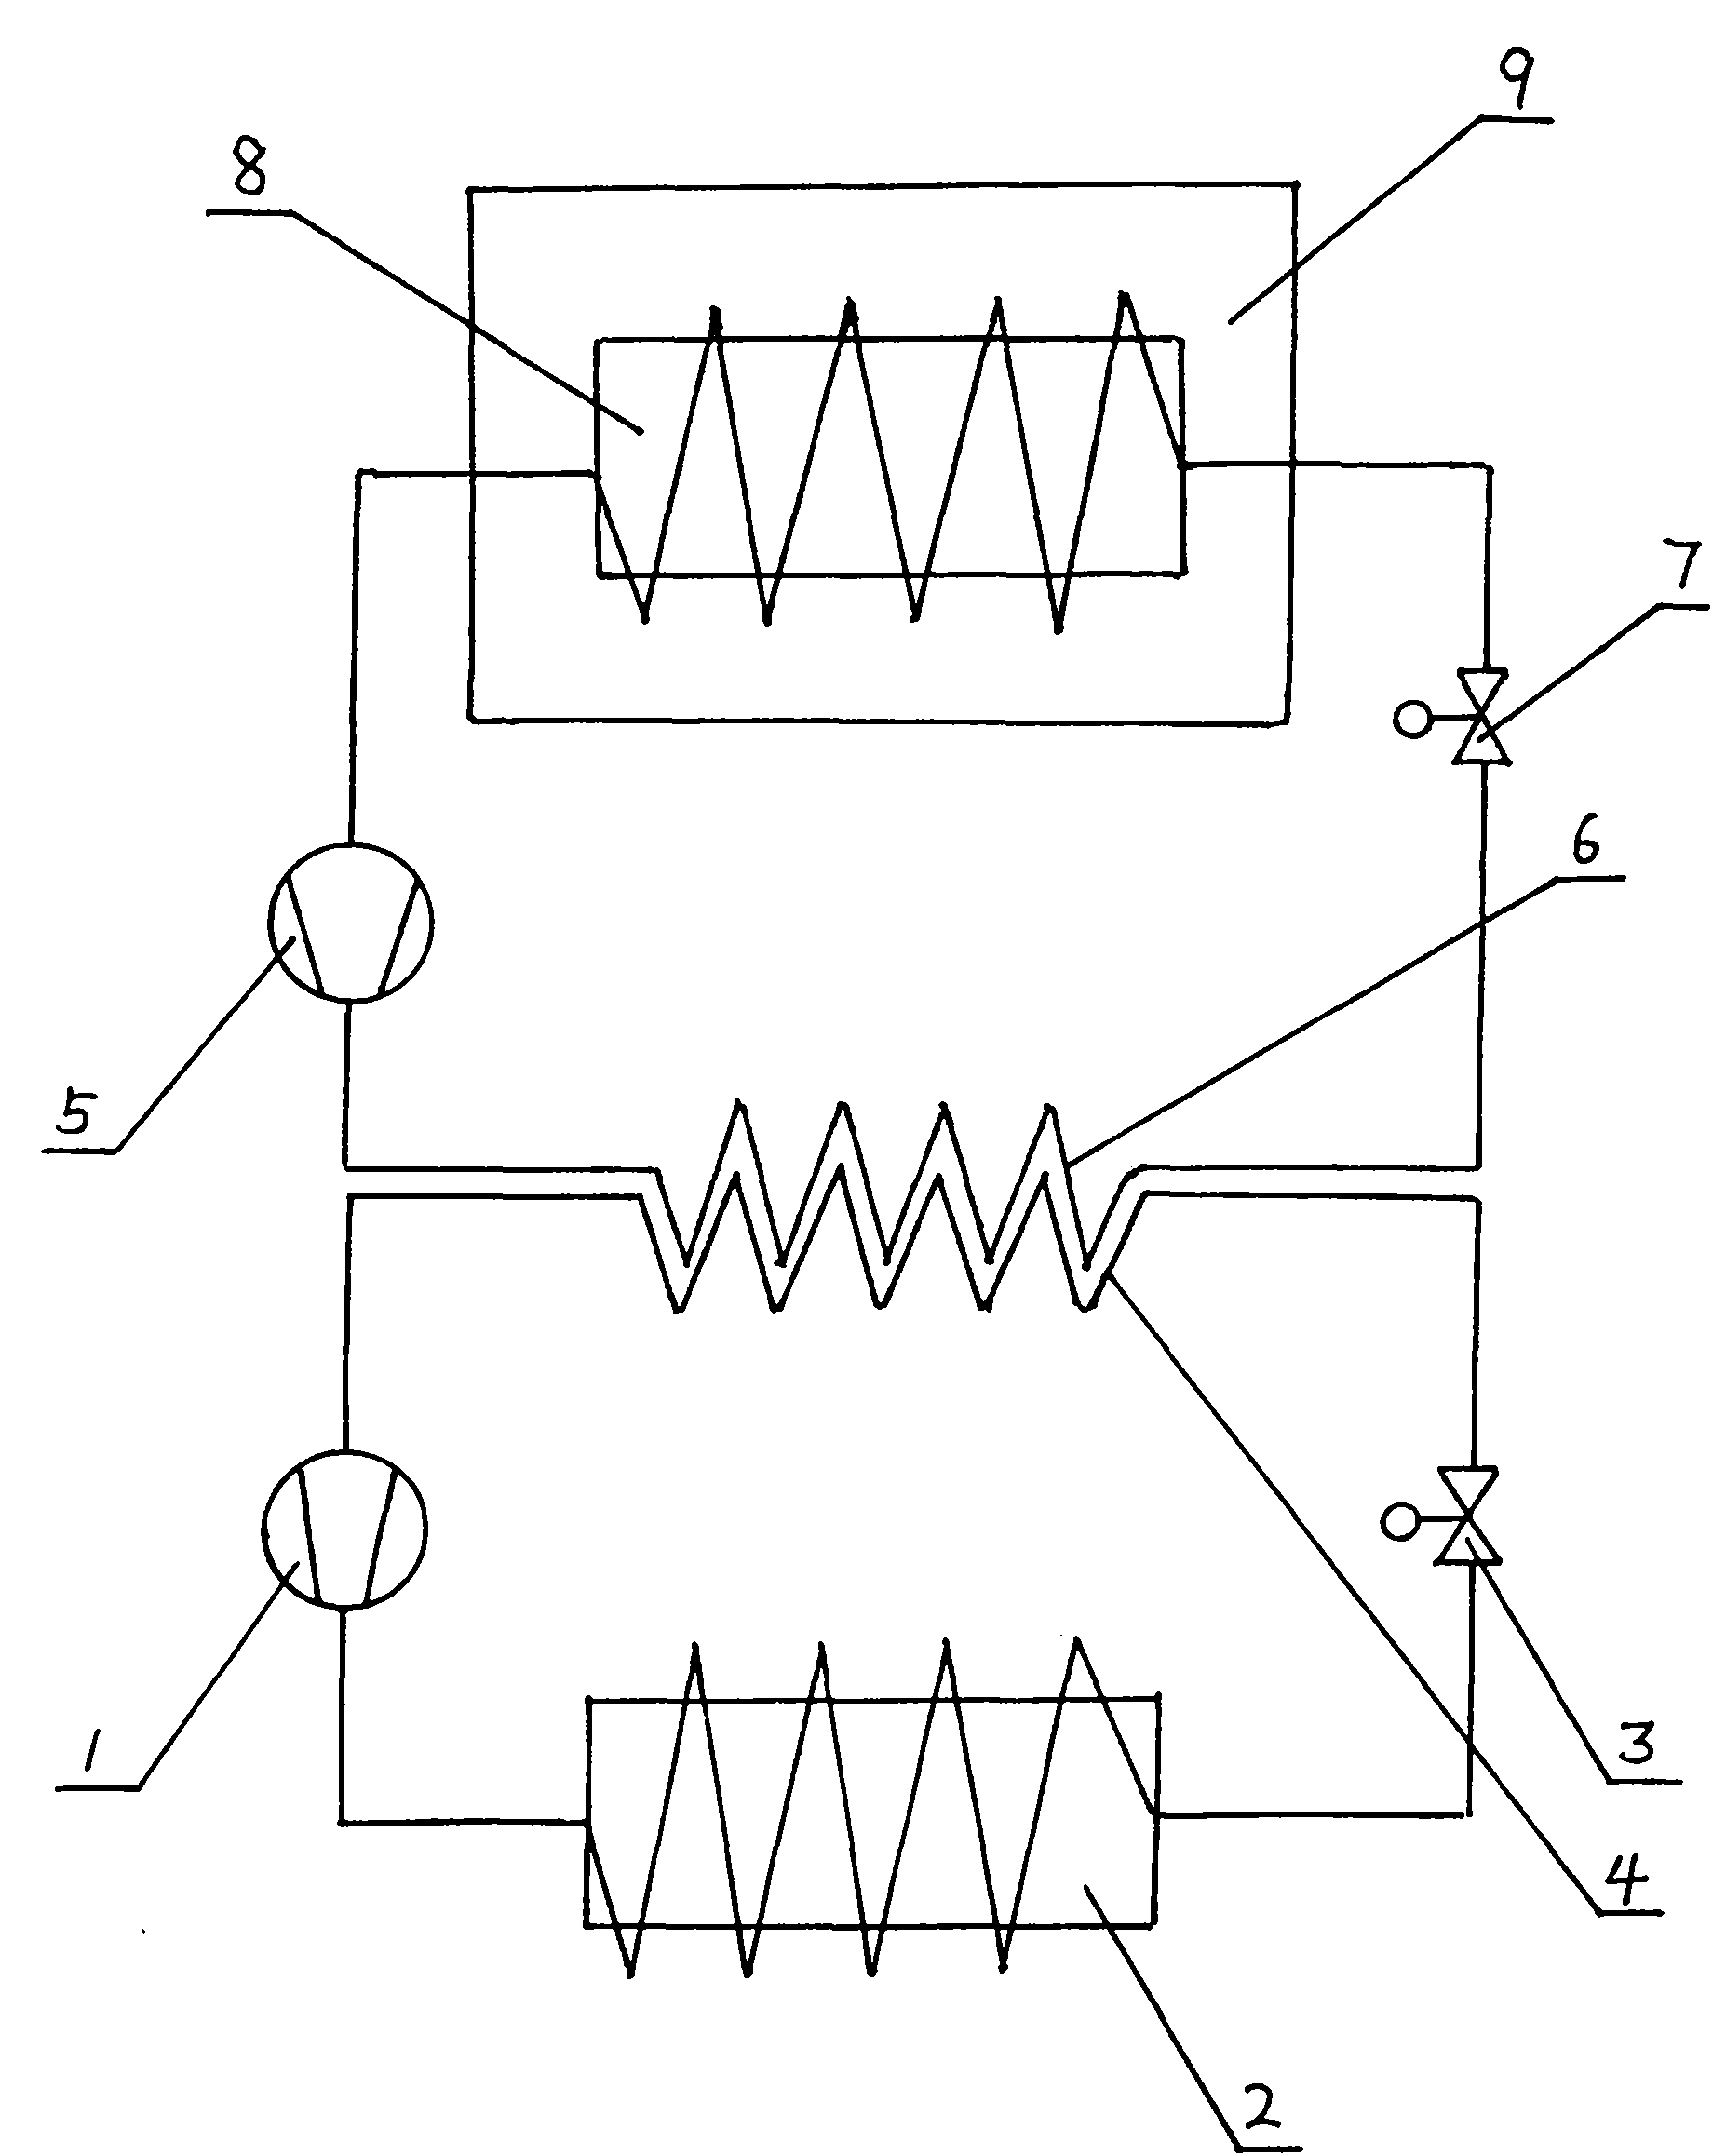 Carbon dioxide refrigeration device structure